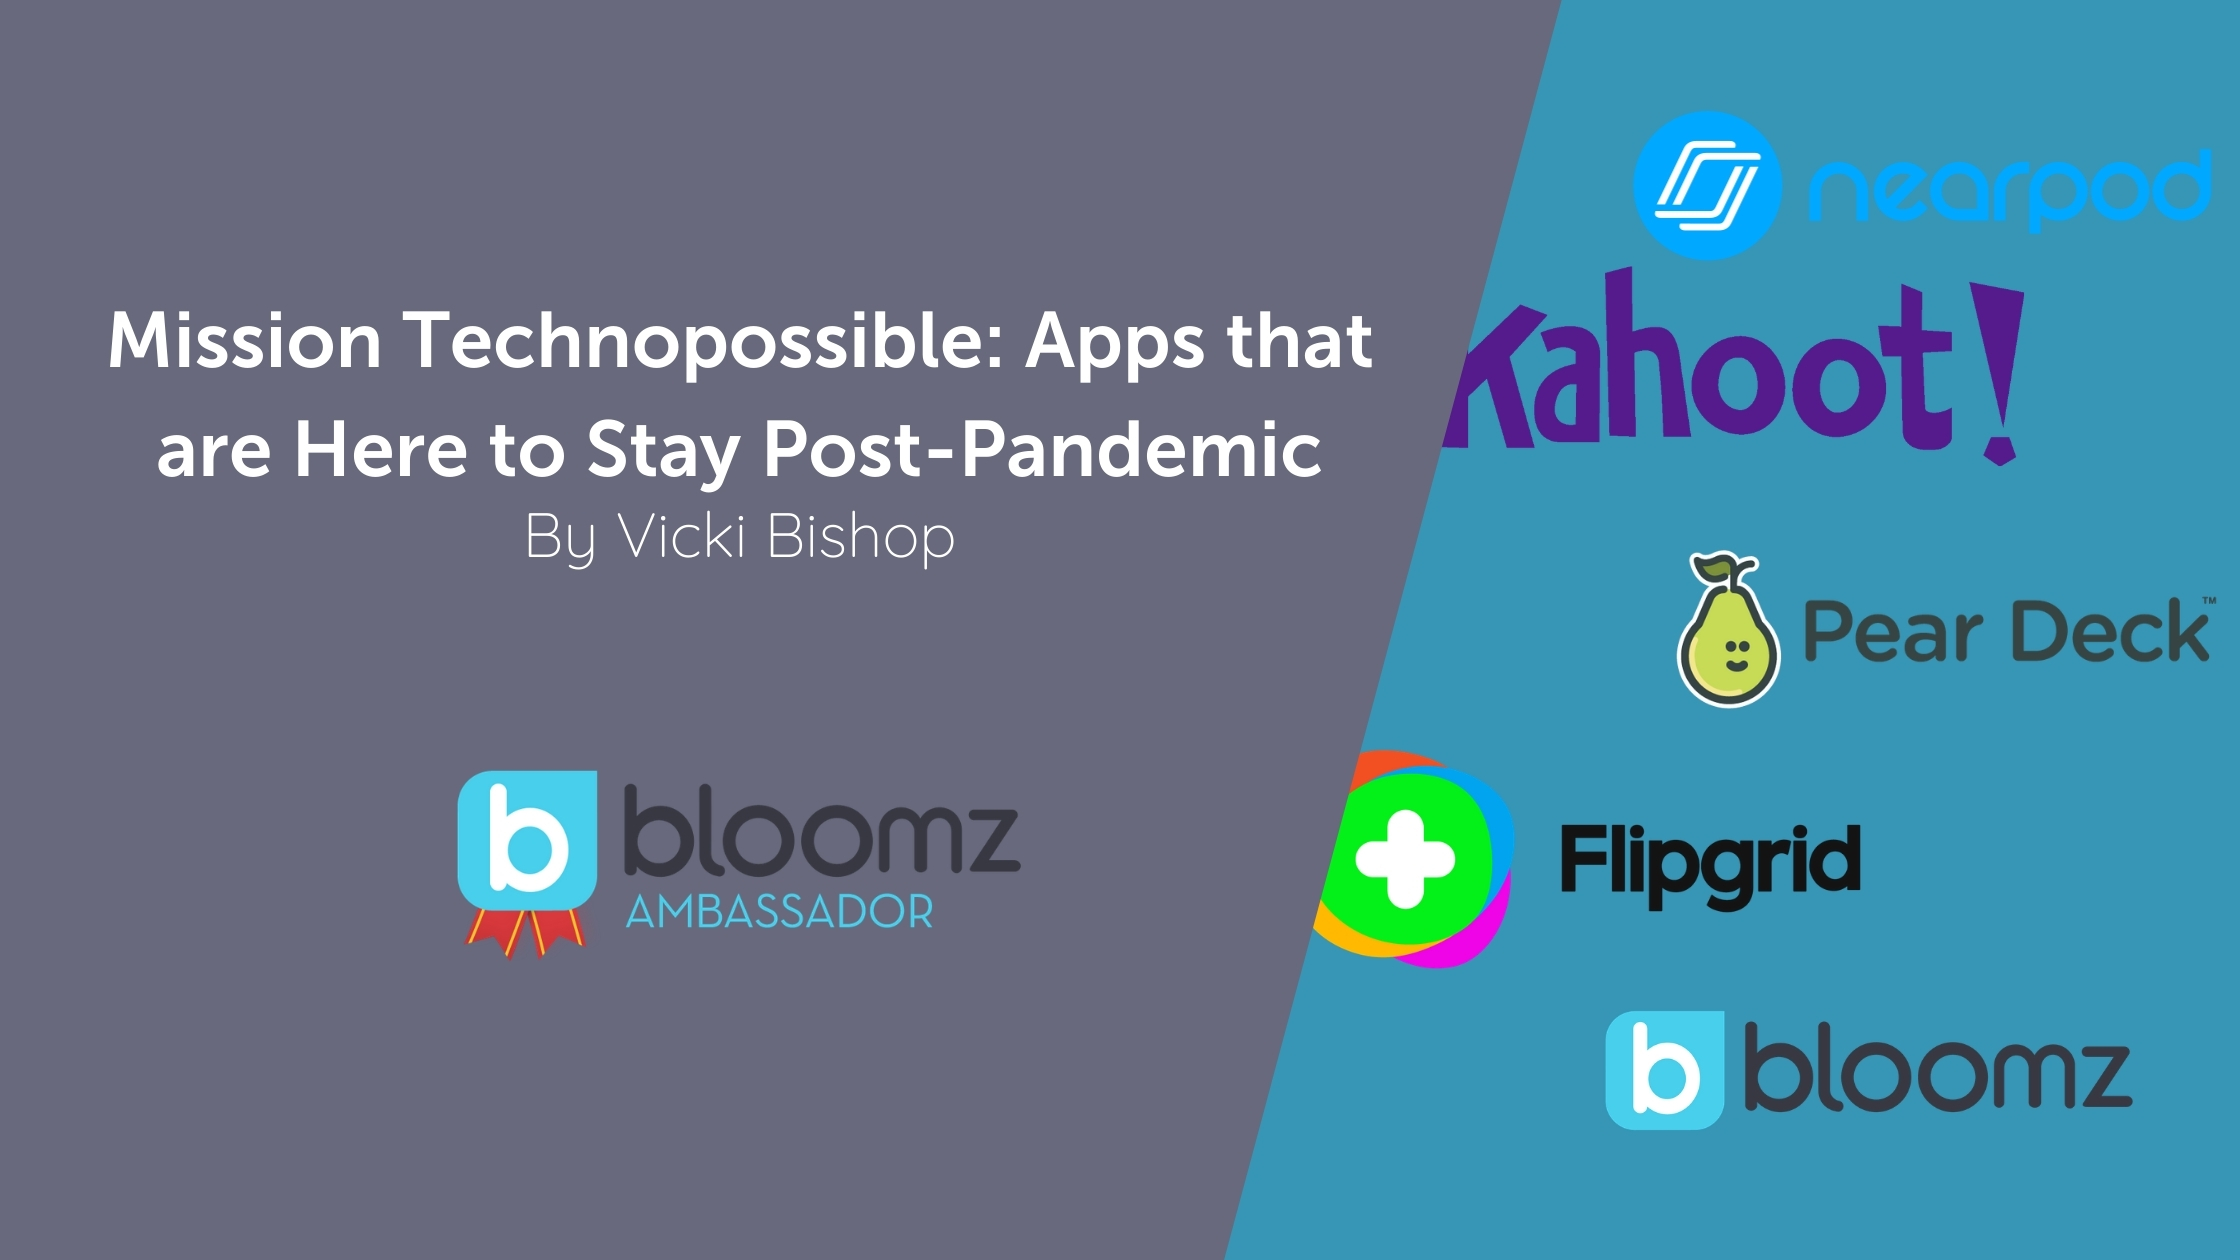 Mission Technopossible: Apps that are Here to Stay Post-Pandemic